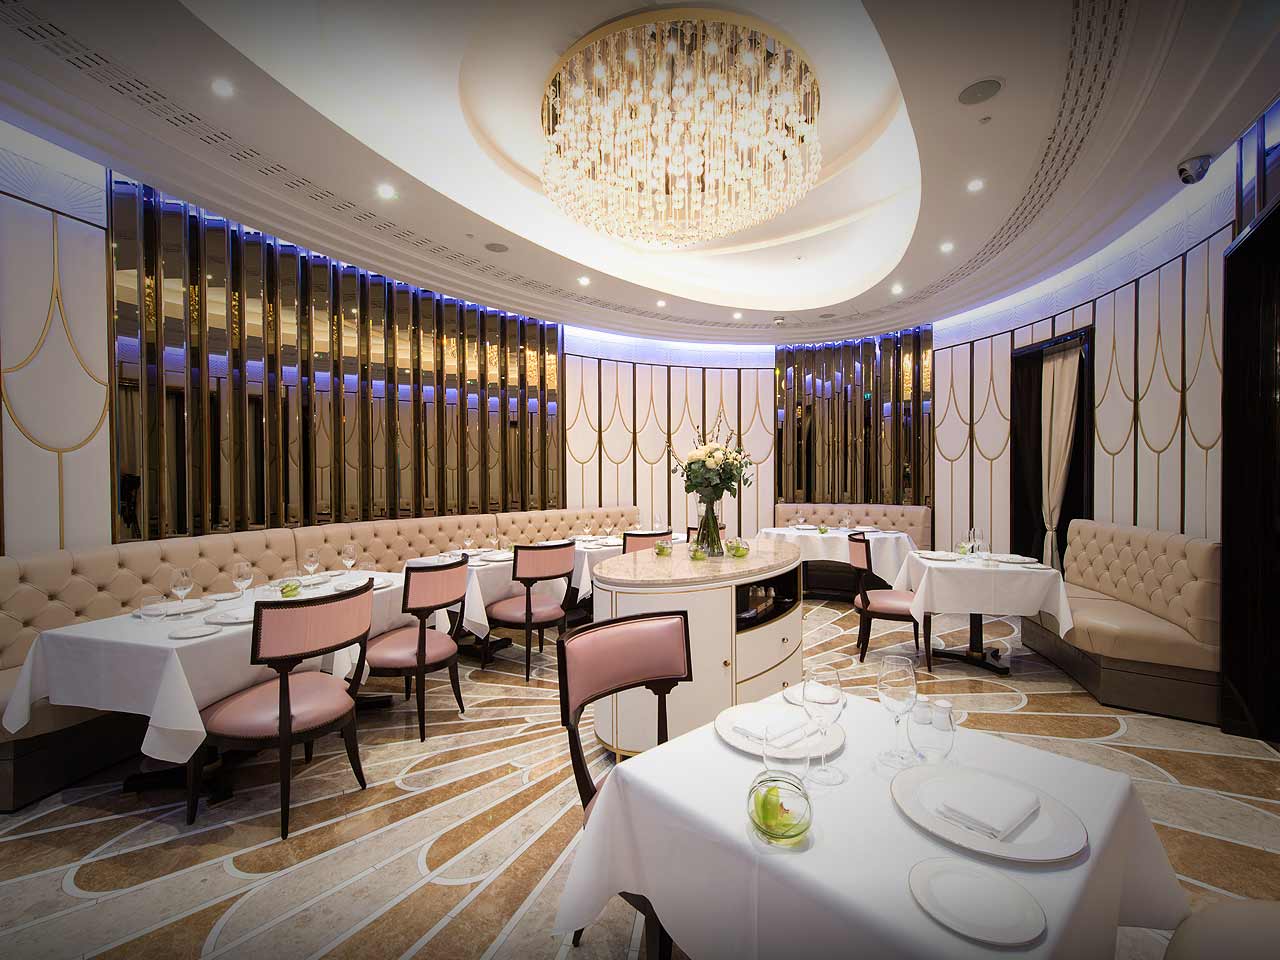 REVIEW: Oval Restaurant, The Wellesley Hotel, Knightsbridge